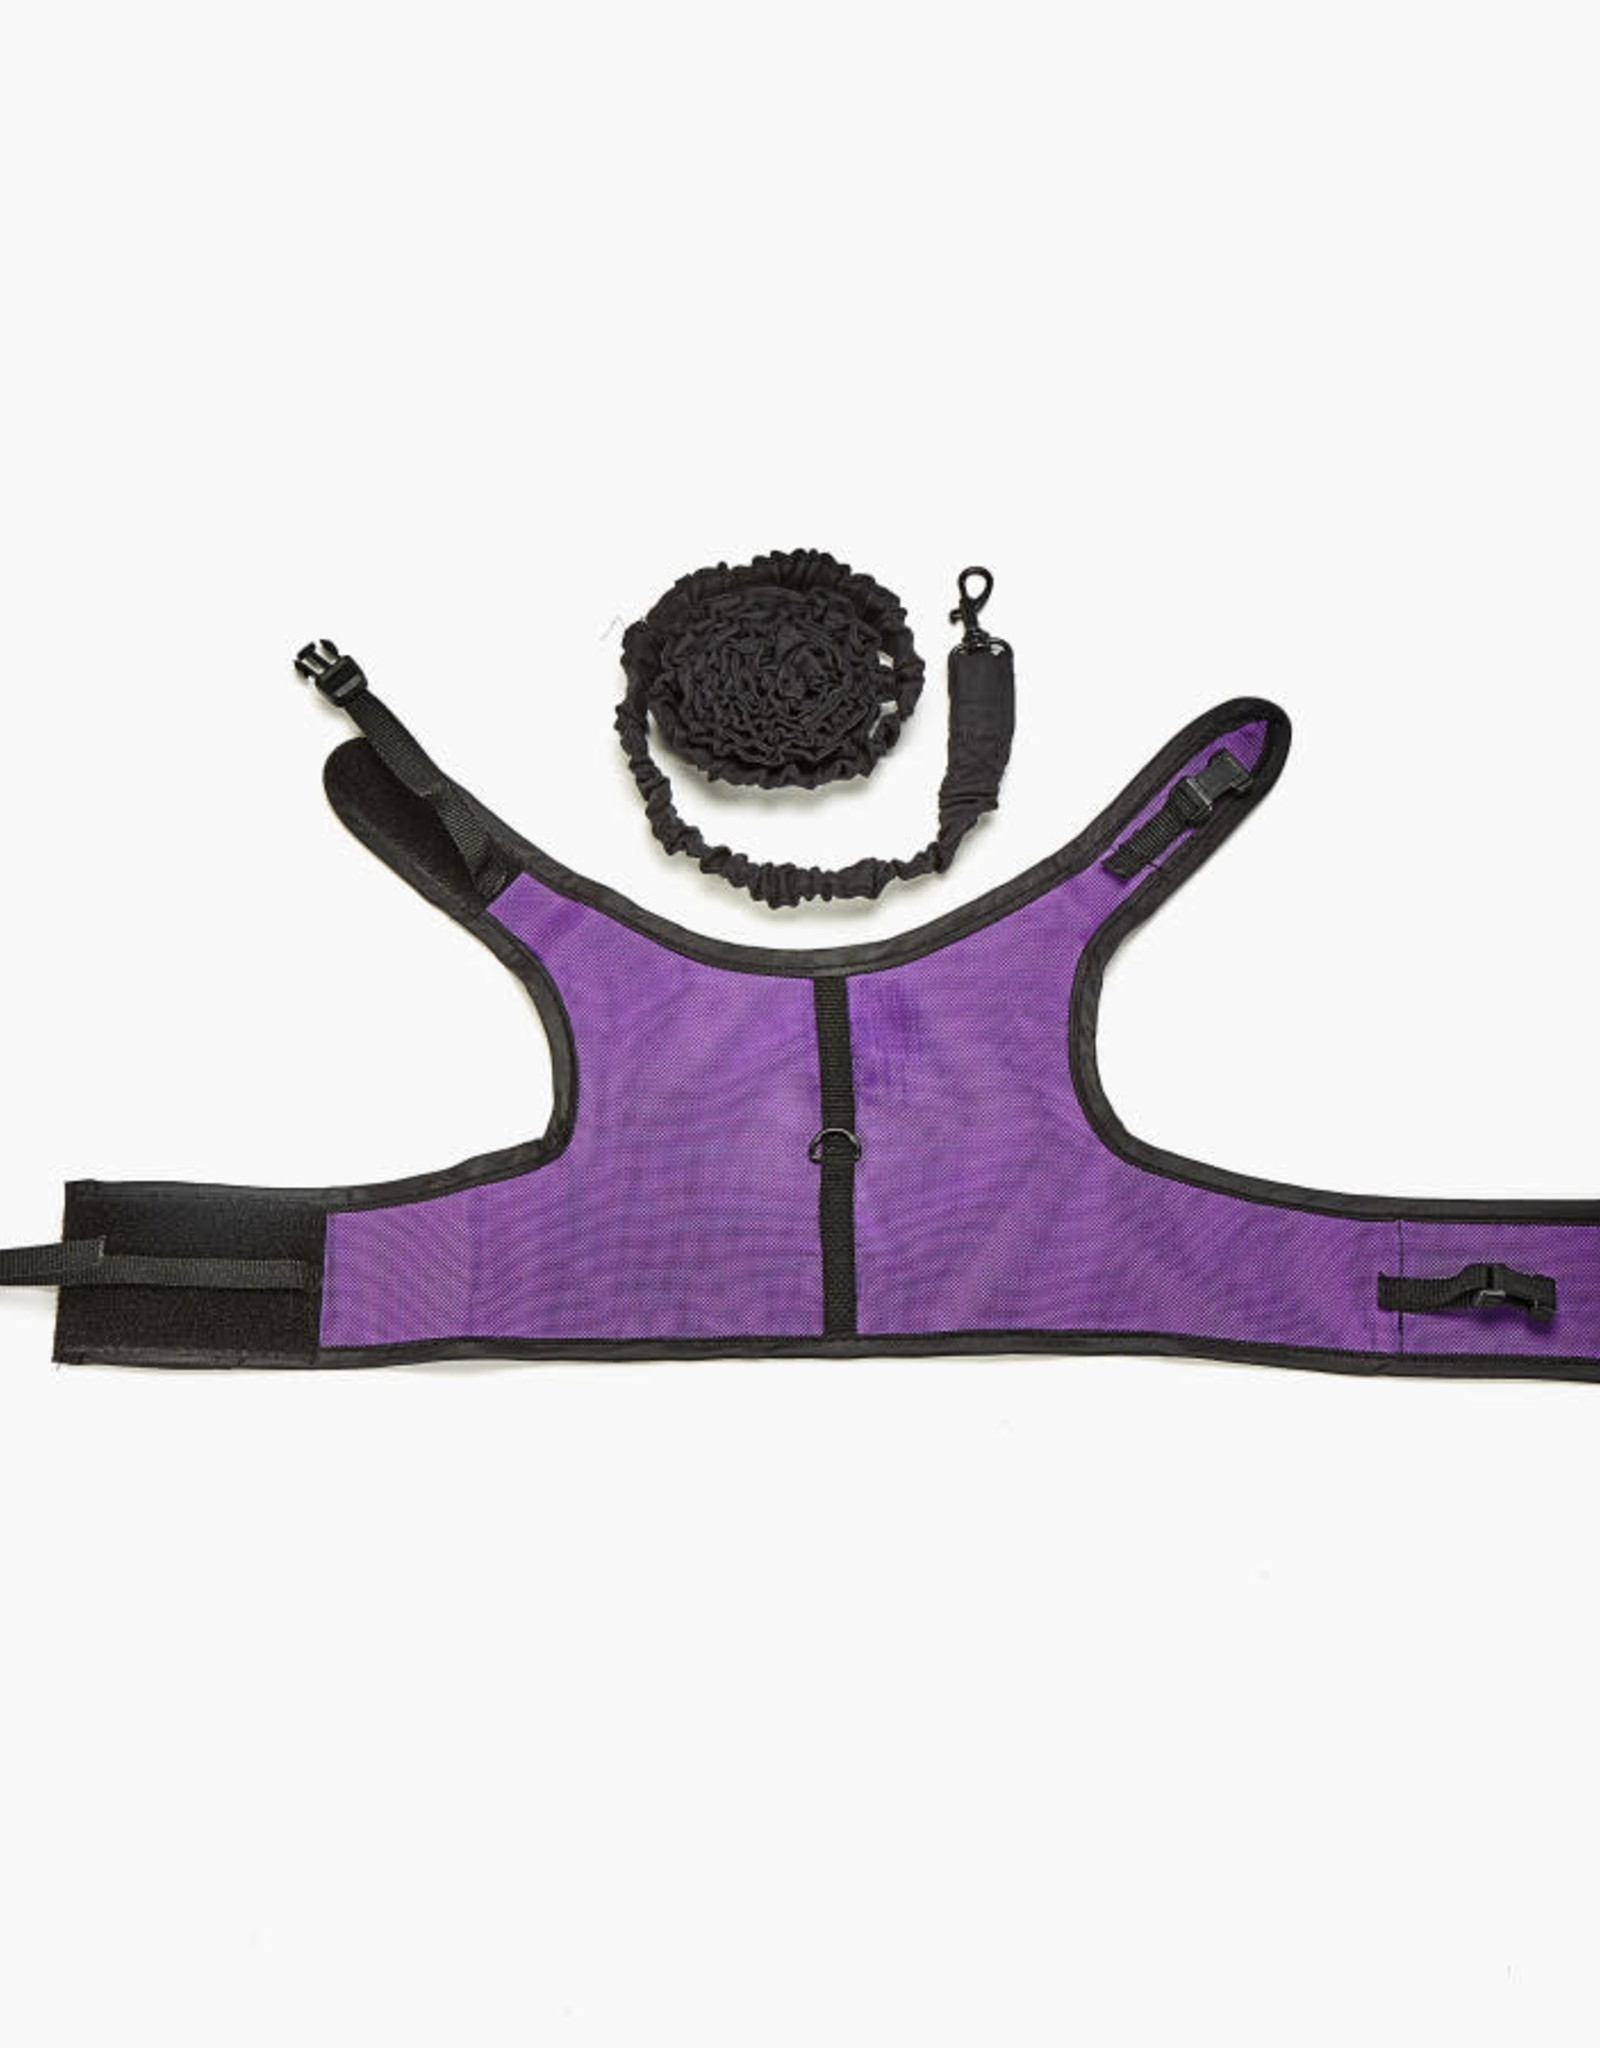 CENTRAL - KAYTEE PRODUCTS KAYTEE- COMFORT HARNESS- 8X4.5X1.5- STRETCHY LEASH- EXTRA LARGE